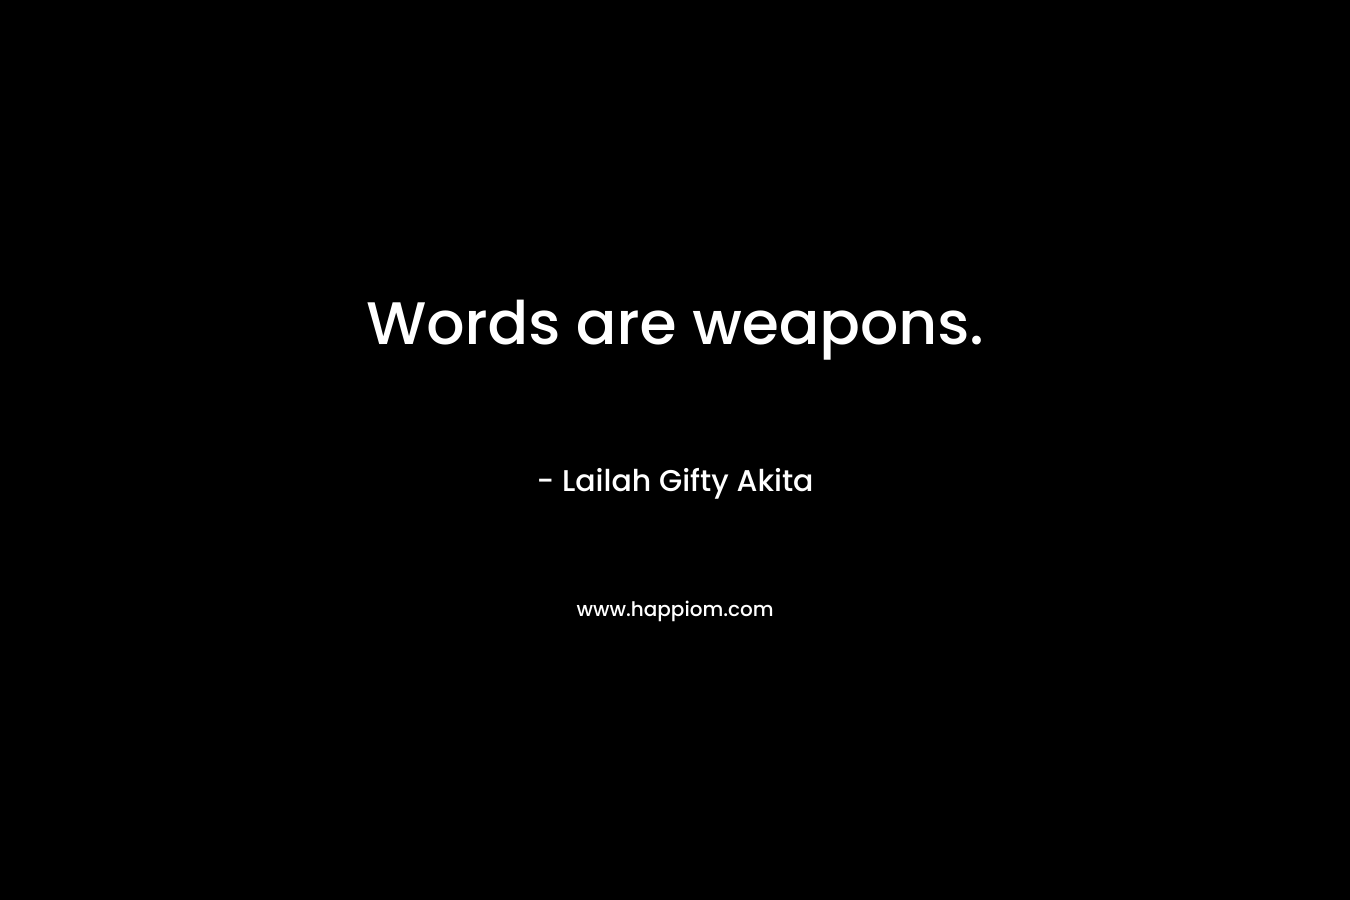 Words are weapons.